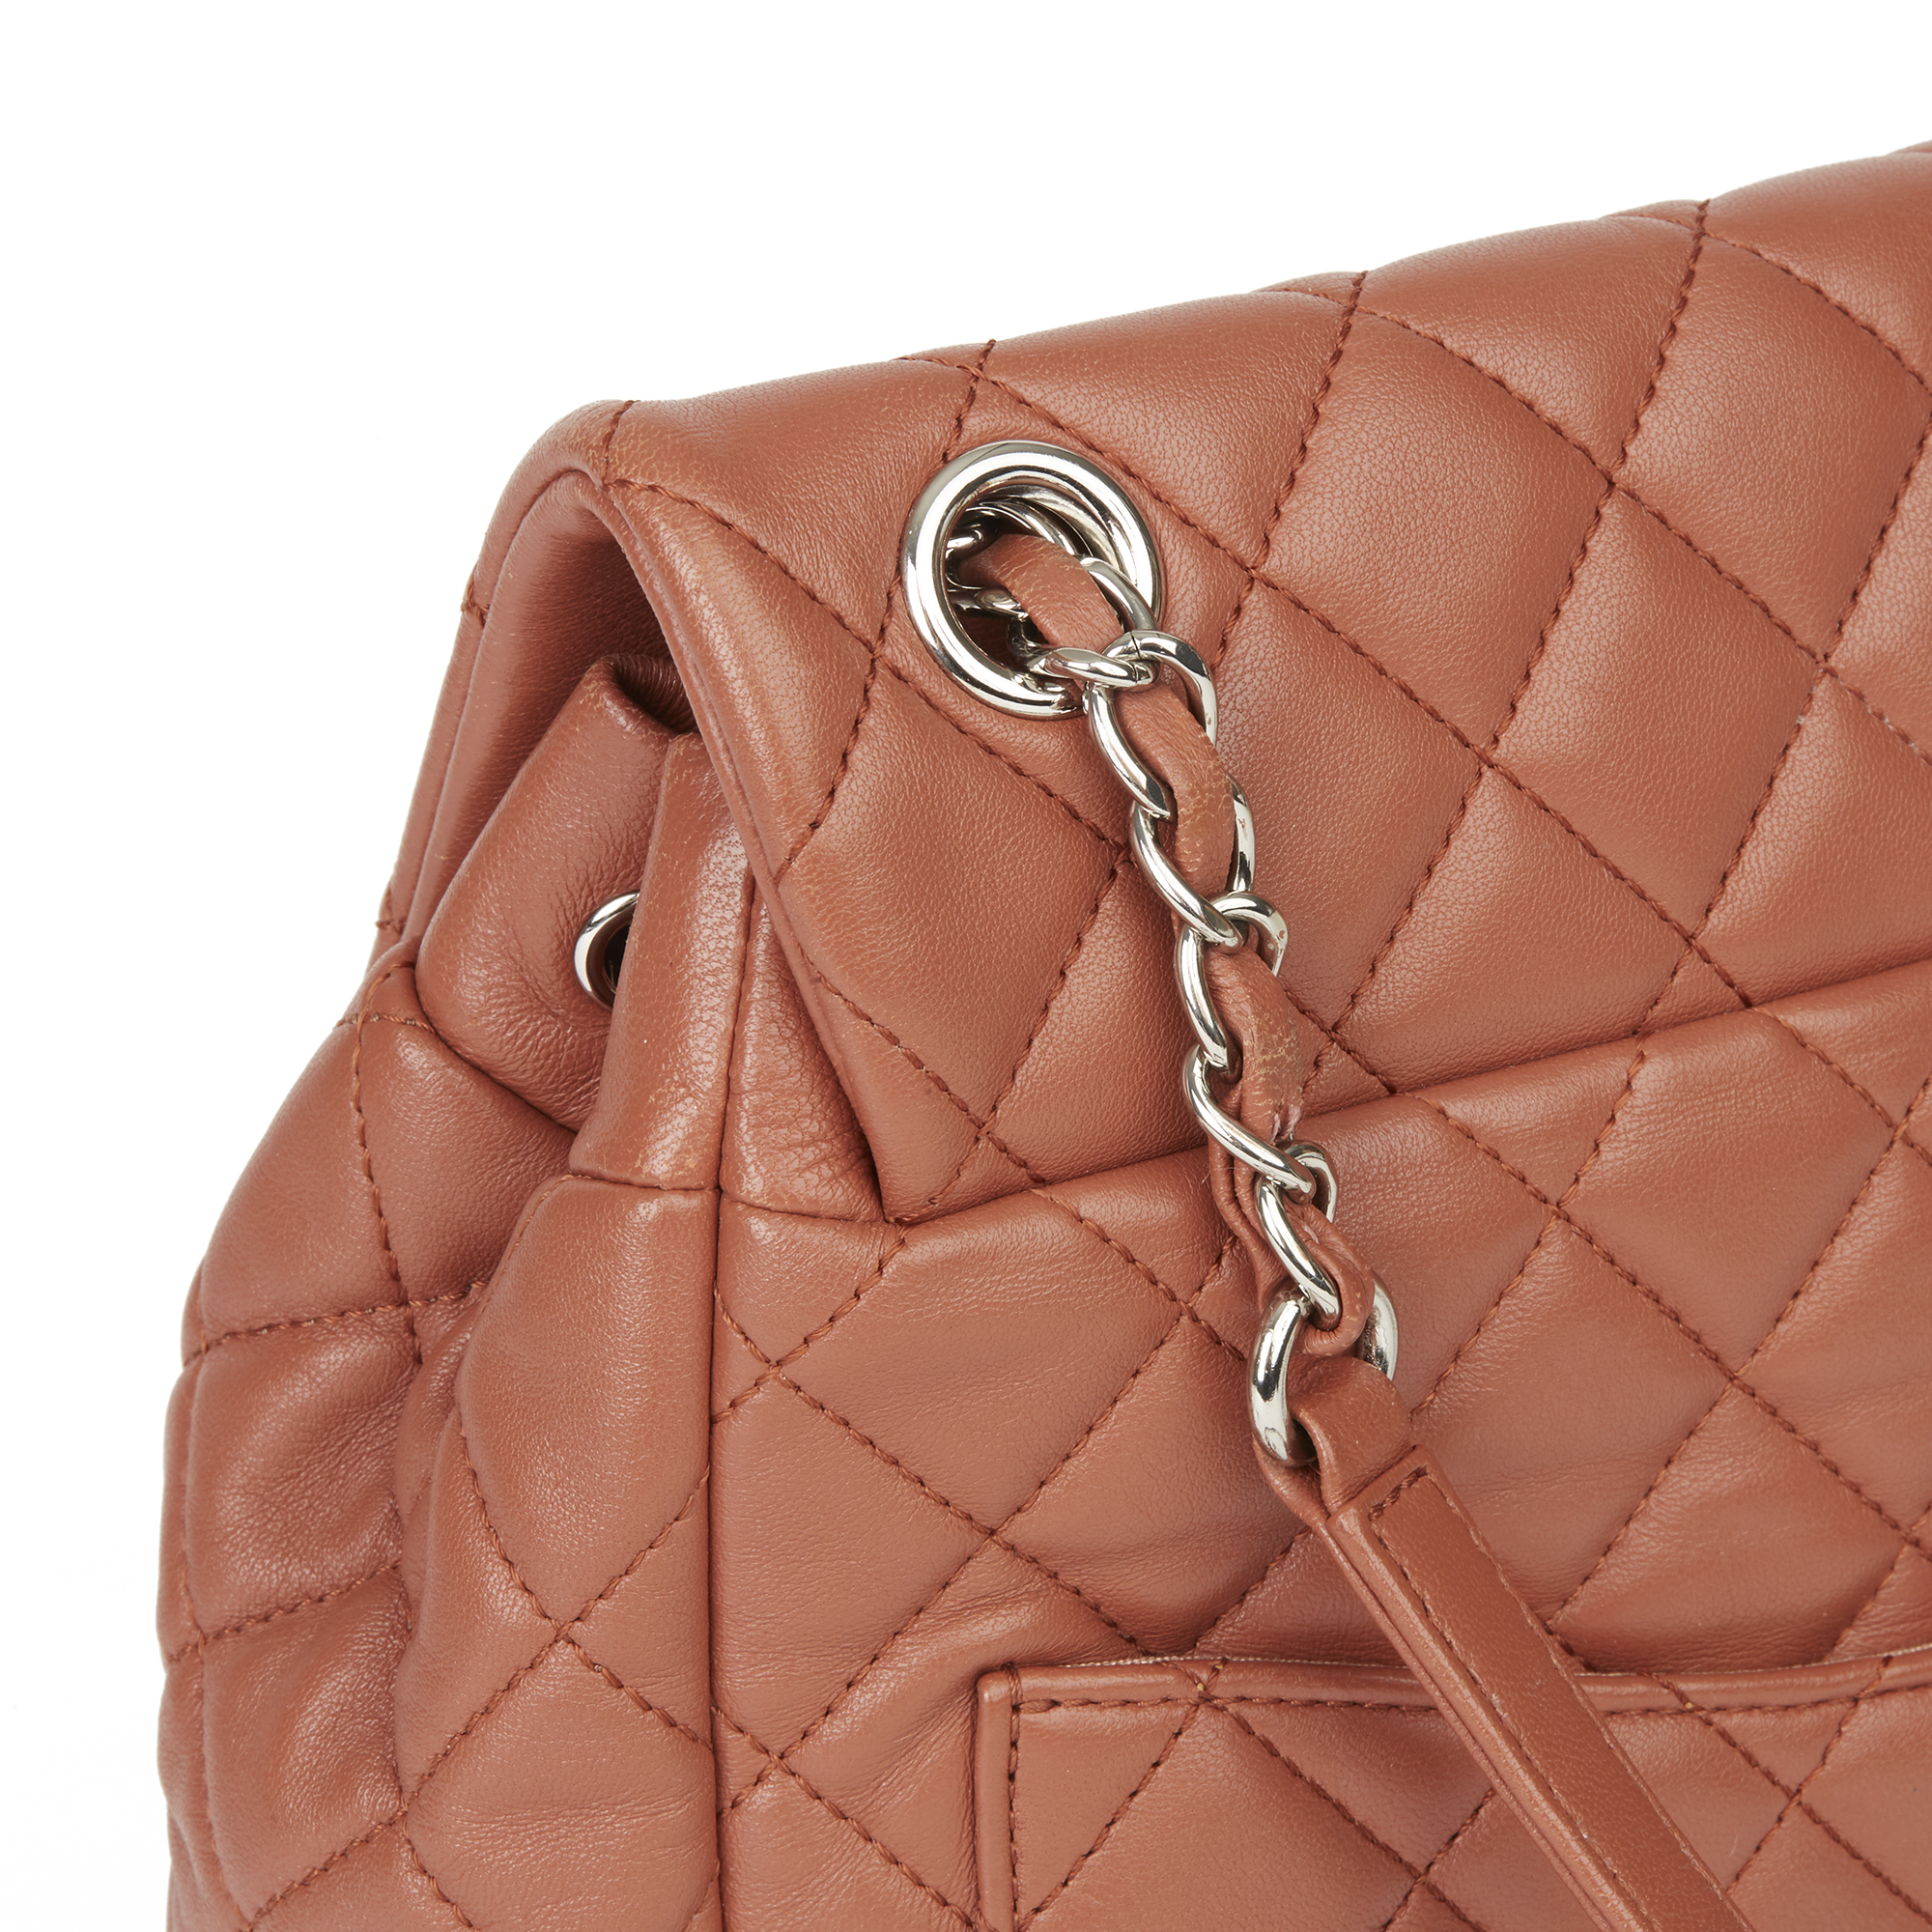 Chanel Small Urban Spirit Backpack - Image 8 of 13